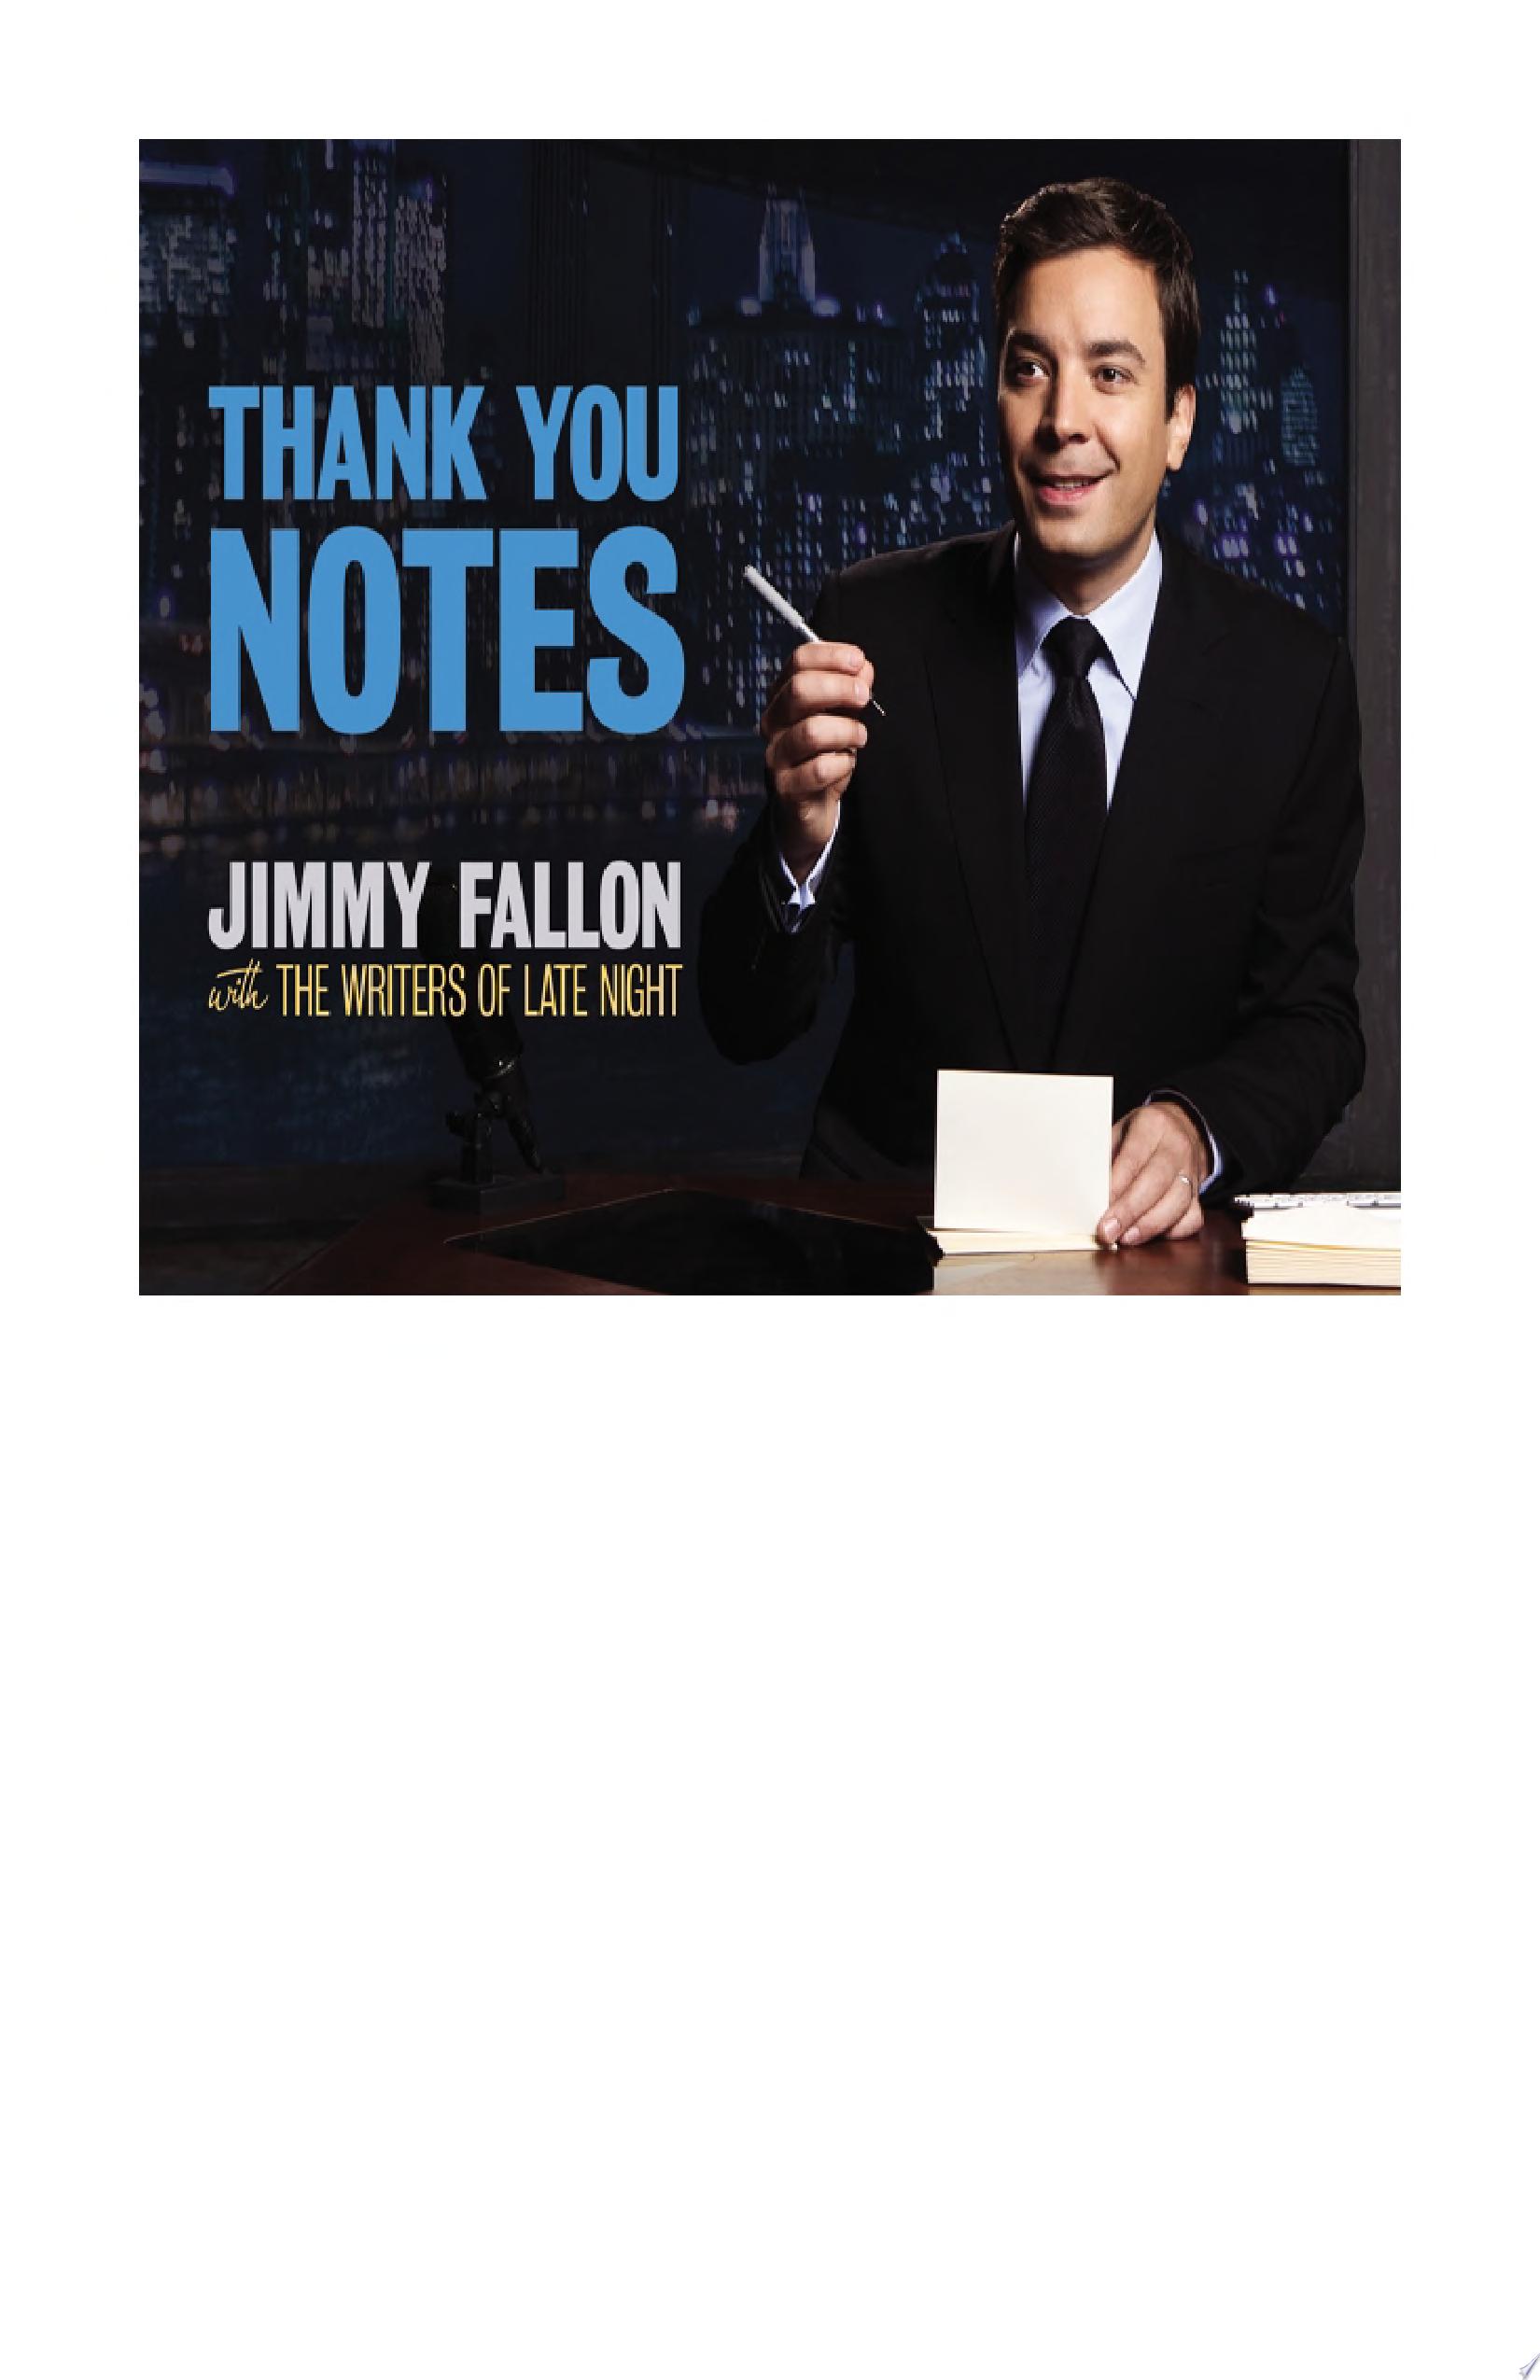 Image for "Thank You Notes"